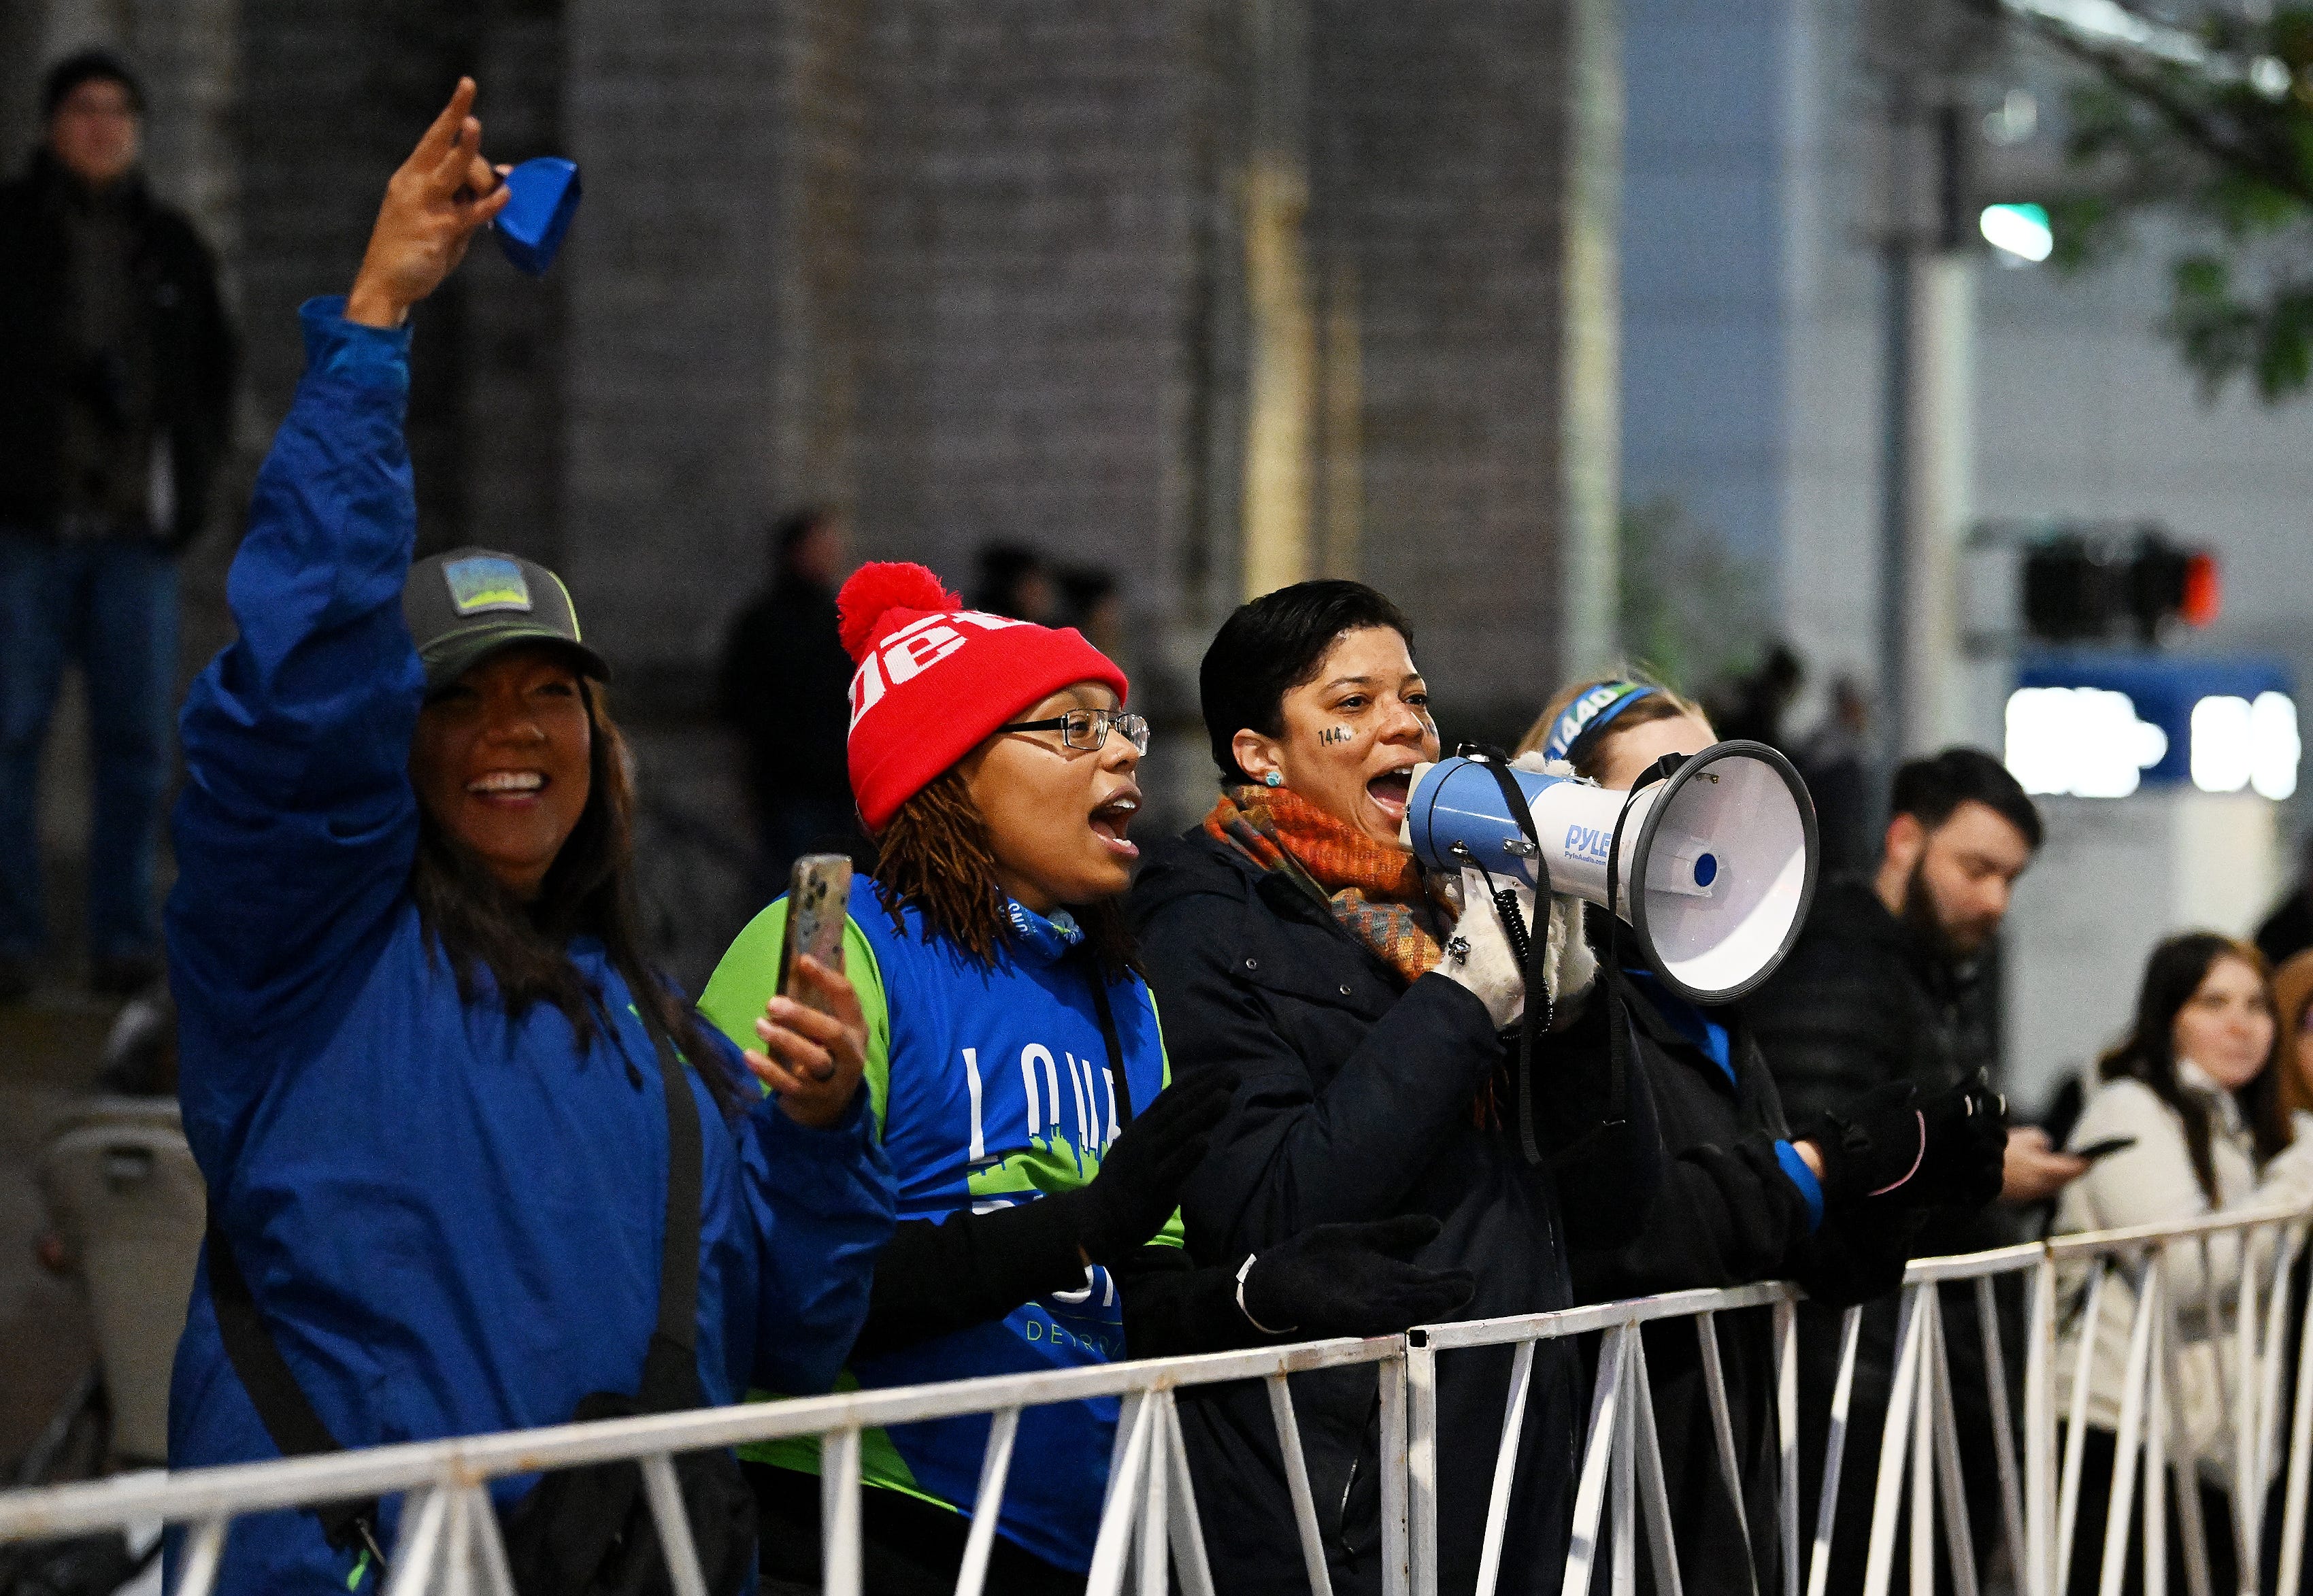 Veronica Coker, left, Micah Johnson, 34, of Detroit and Rebecca Hason, 44, of Saline from the Love Runs organization cheer on the runners at the start of the Detroit Free Press Marathon in Detroit on Oct. 15, 2023.